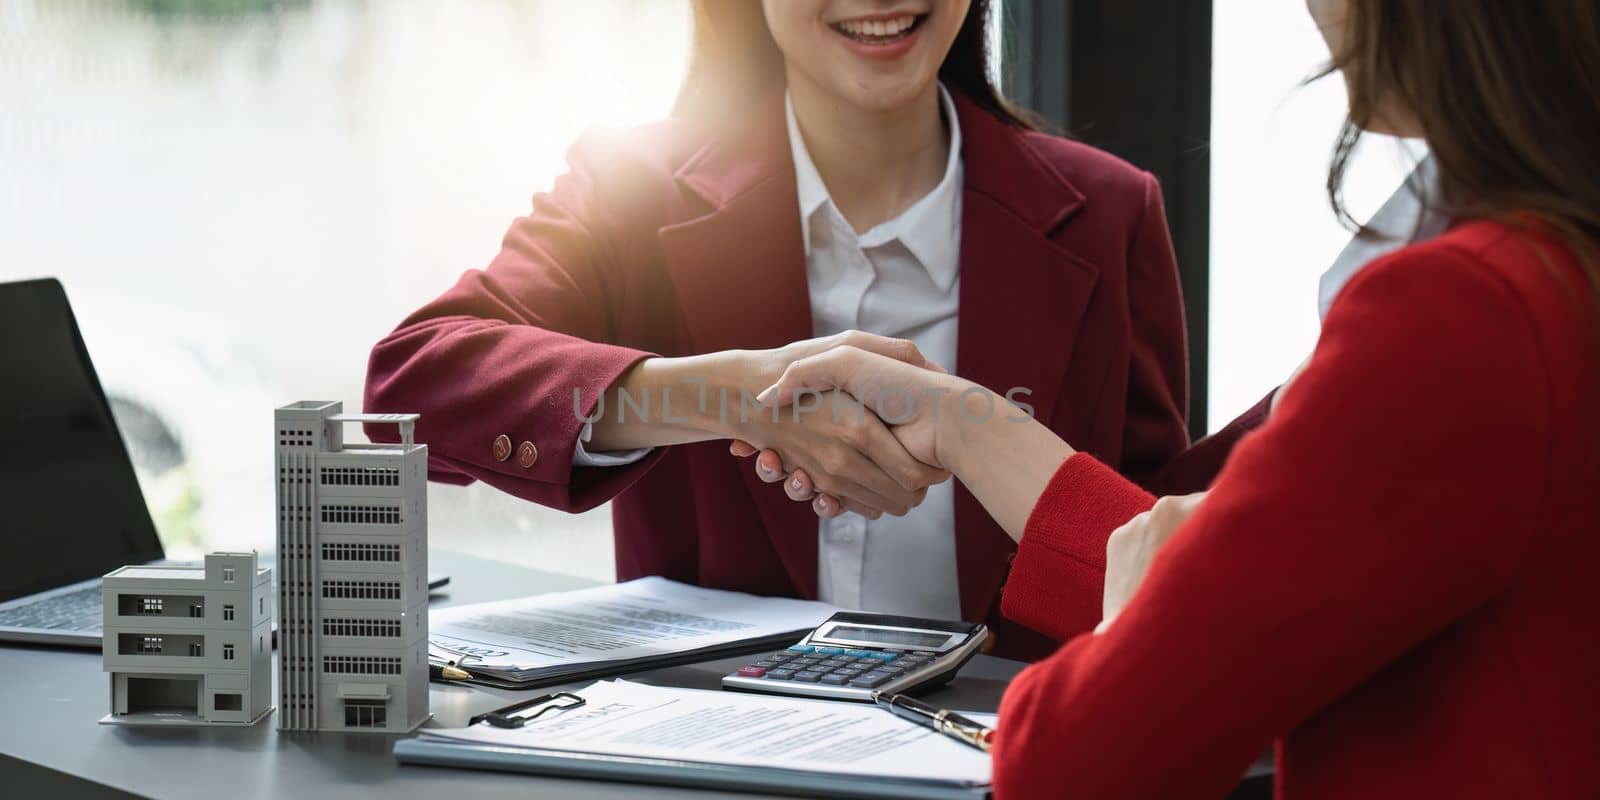 Real estate agents shake hands after the signing of the contract agreement. Business people shake hands. Real estate concept.